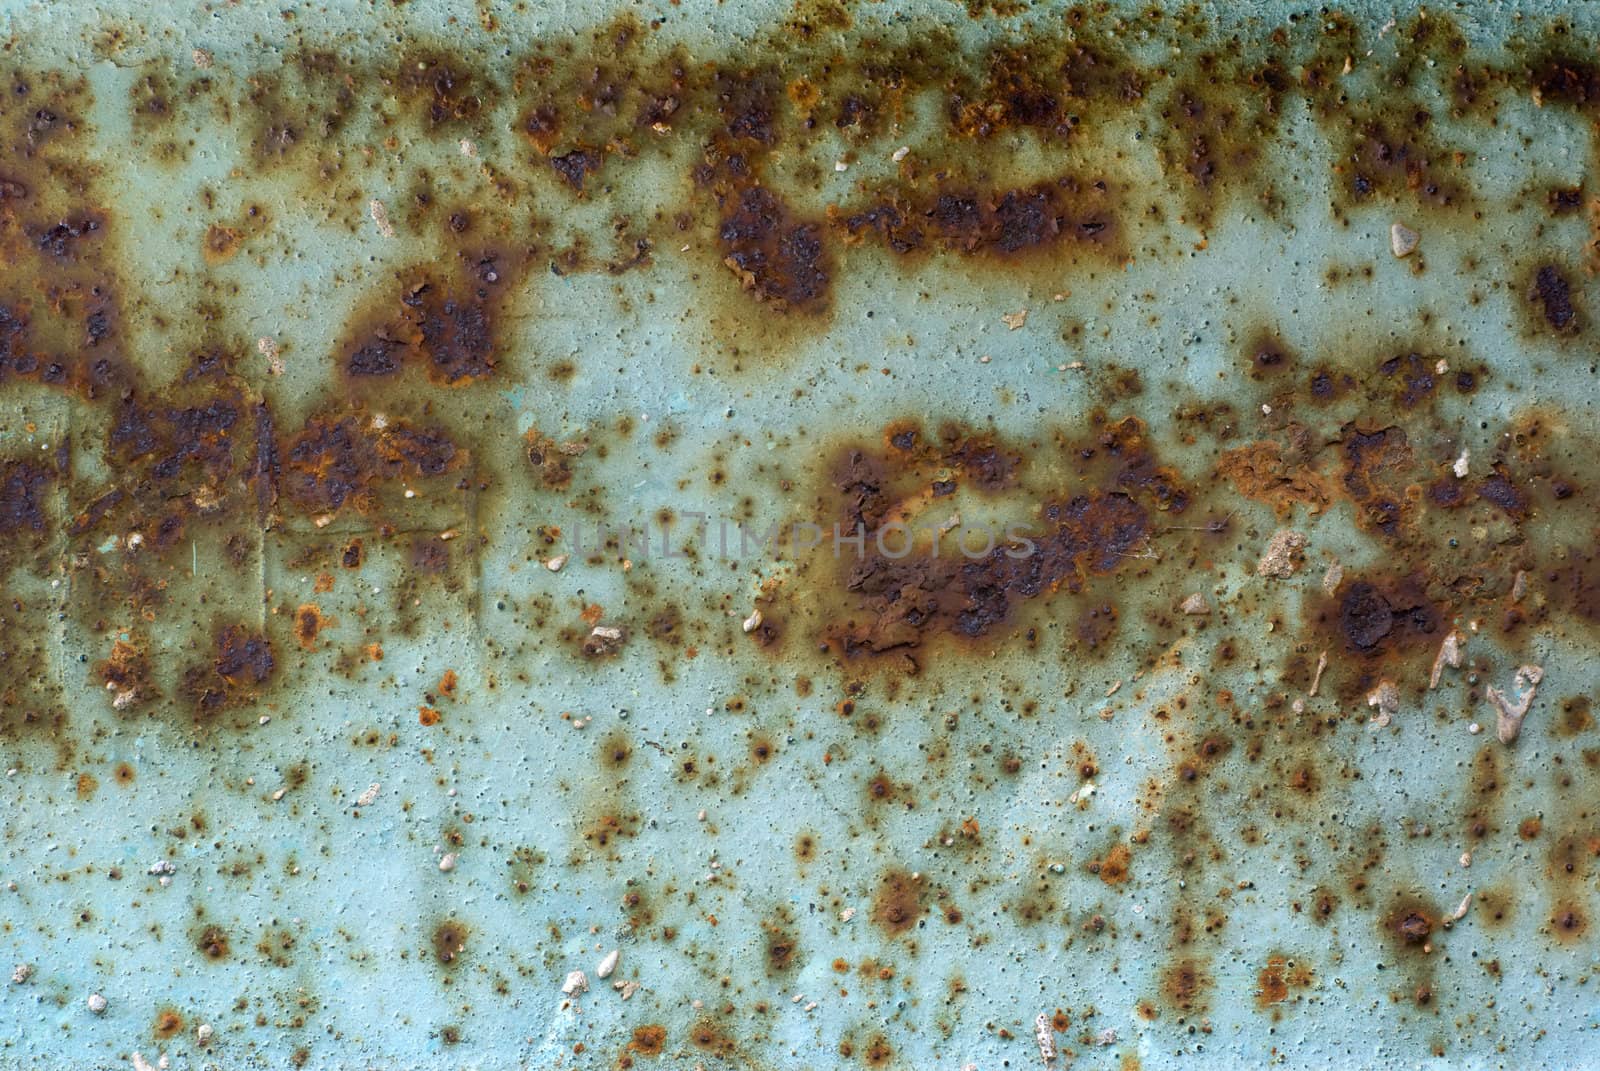 Peeled paint and stains on rusty metal.